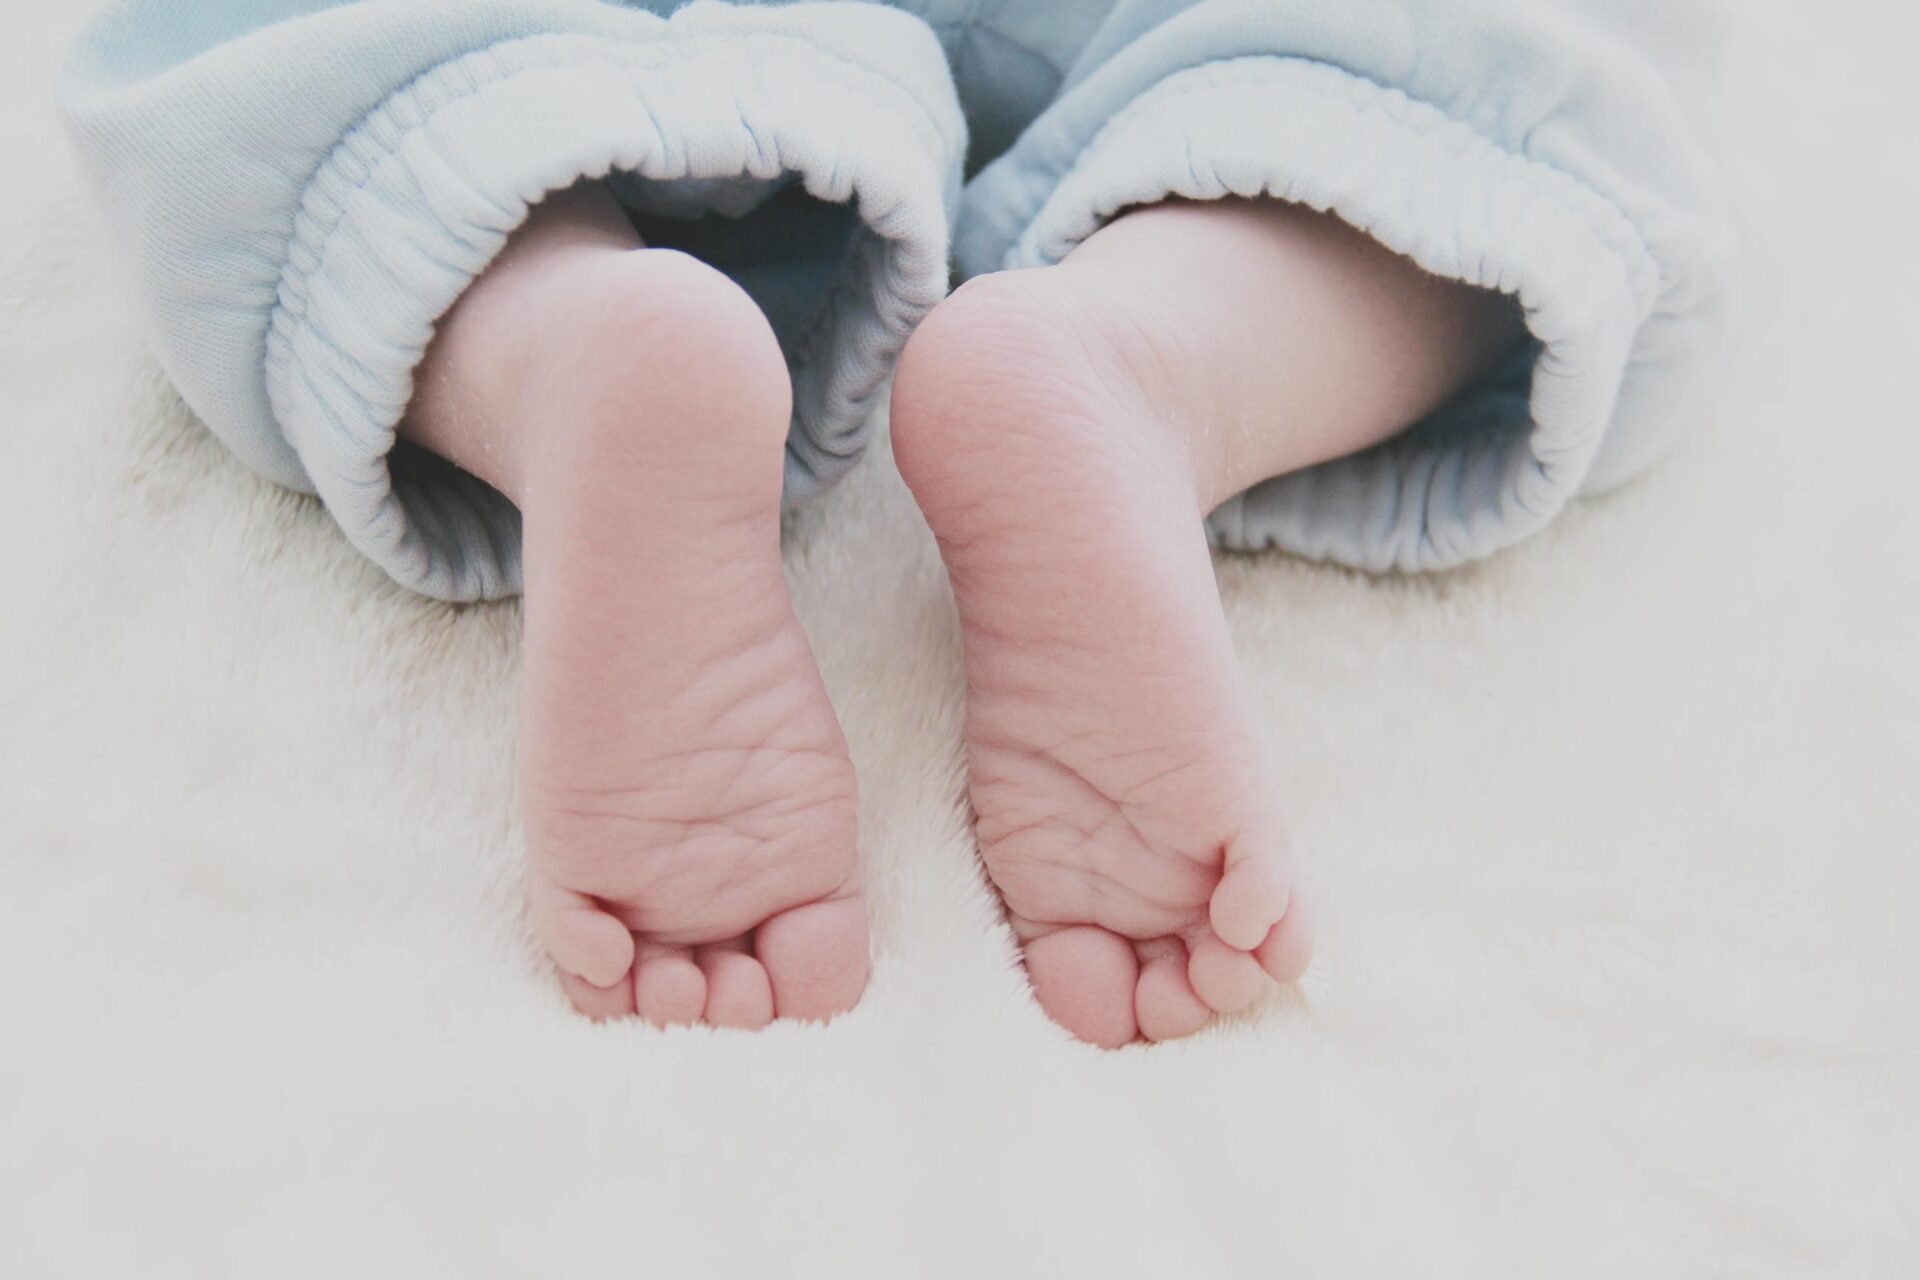 Feet of a baby wearing grey-blue trackpants